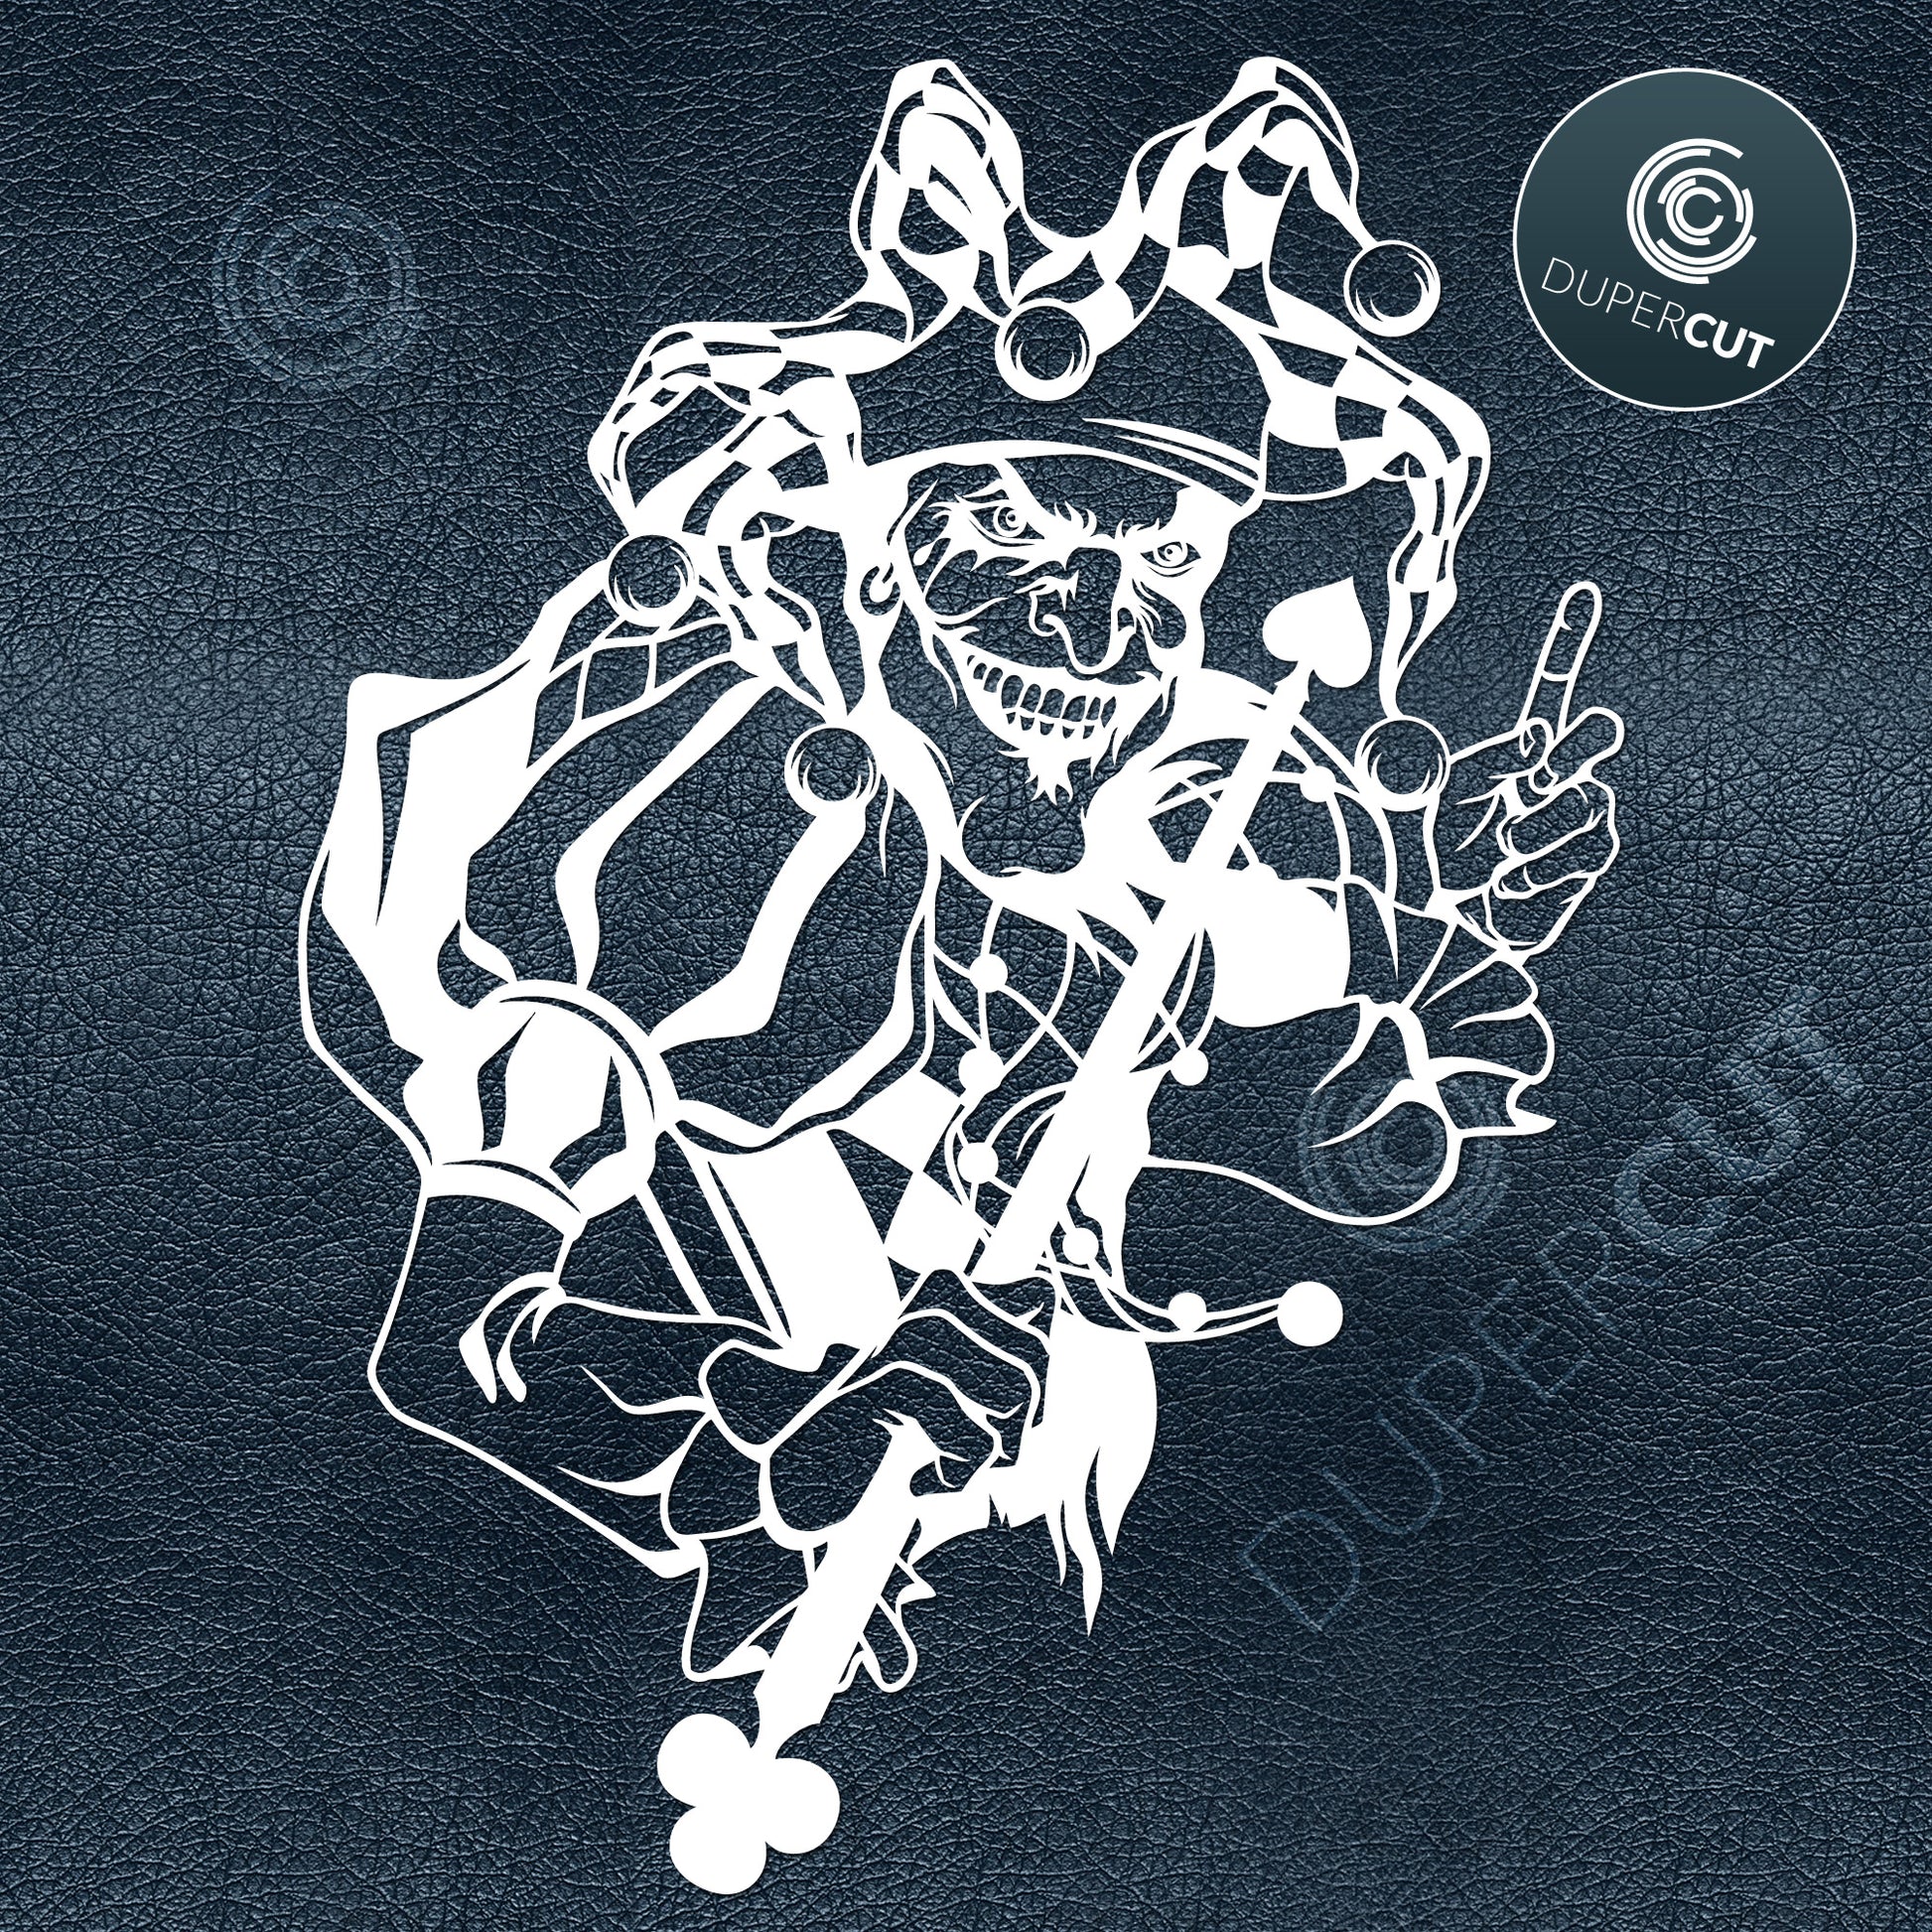 Tattoo Joker Design Paper cutting template for commercial use. SVG files for Silhouette Cameo, Cricut, Glowforge, DXF for CNC, laser cutting, print on demand